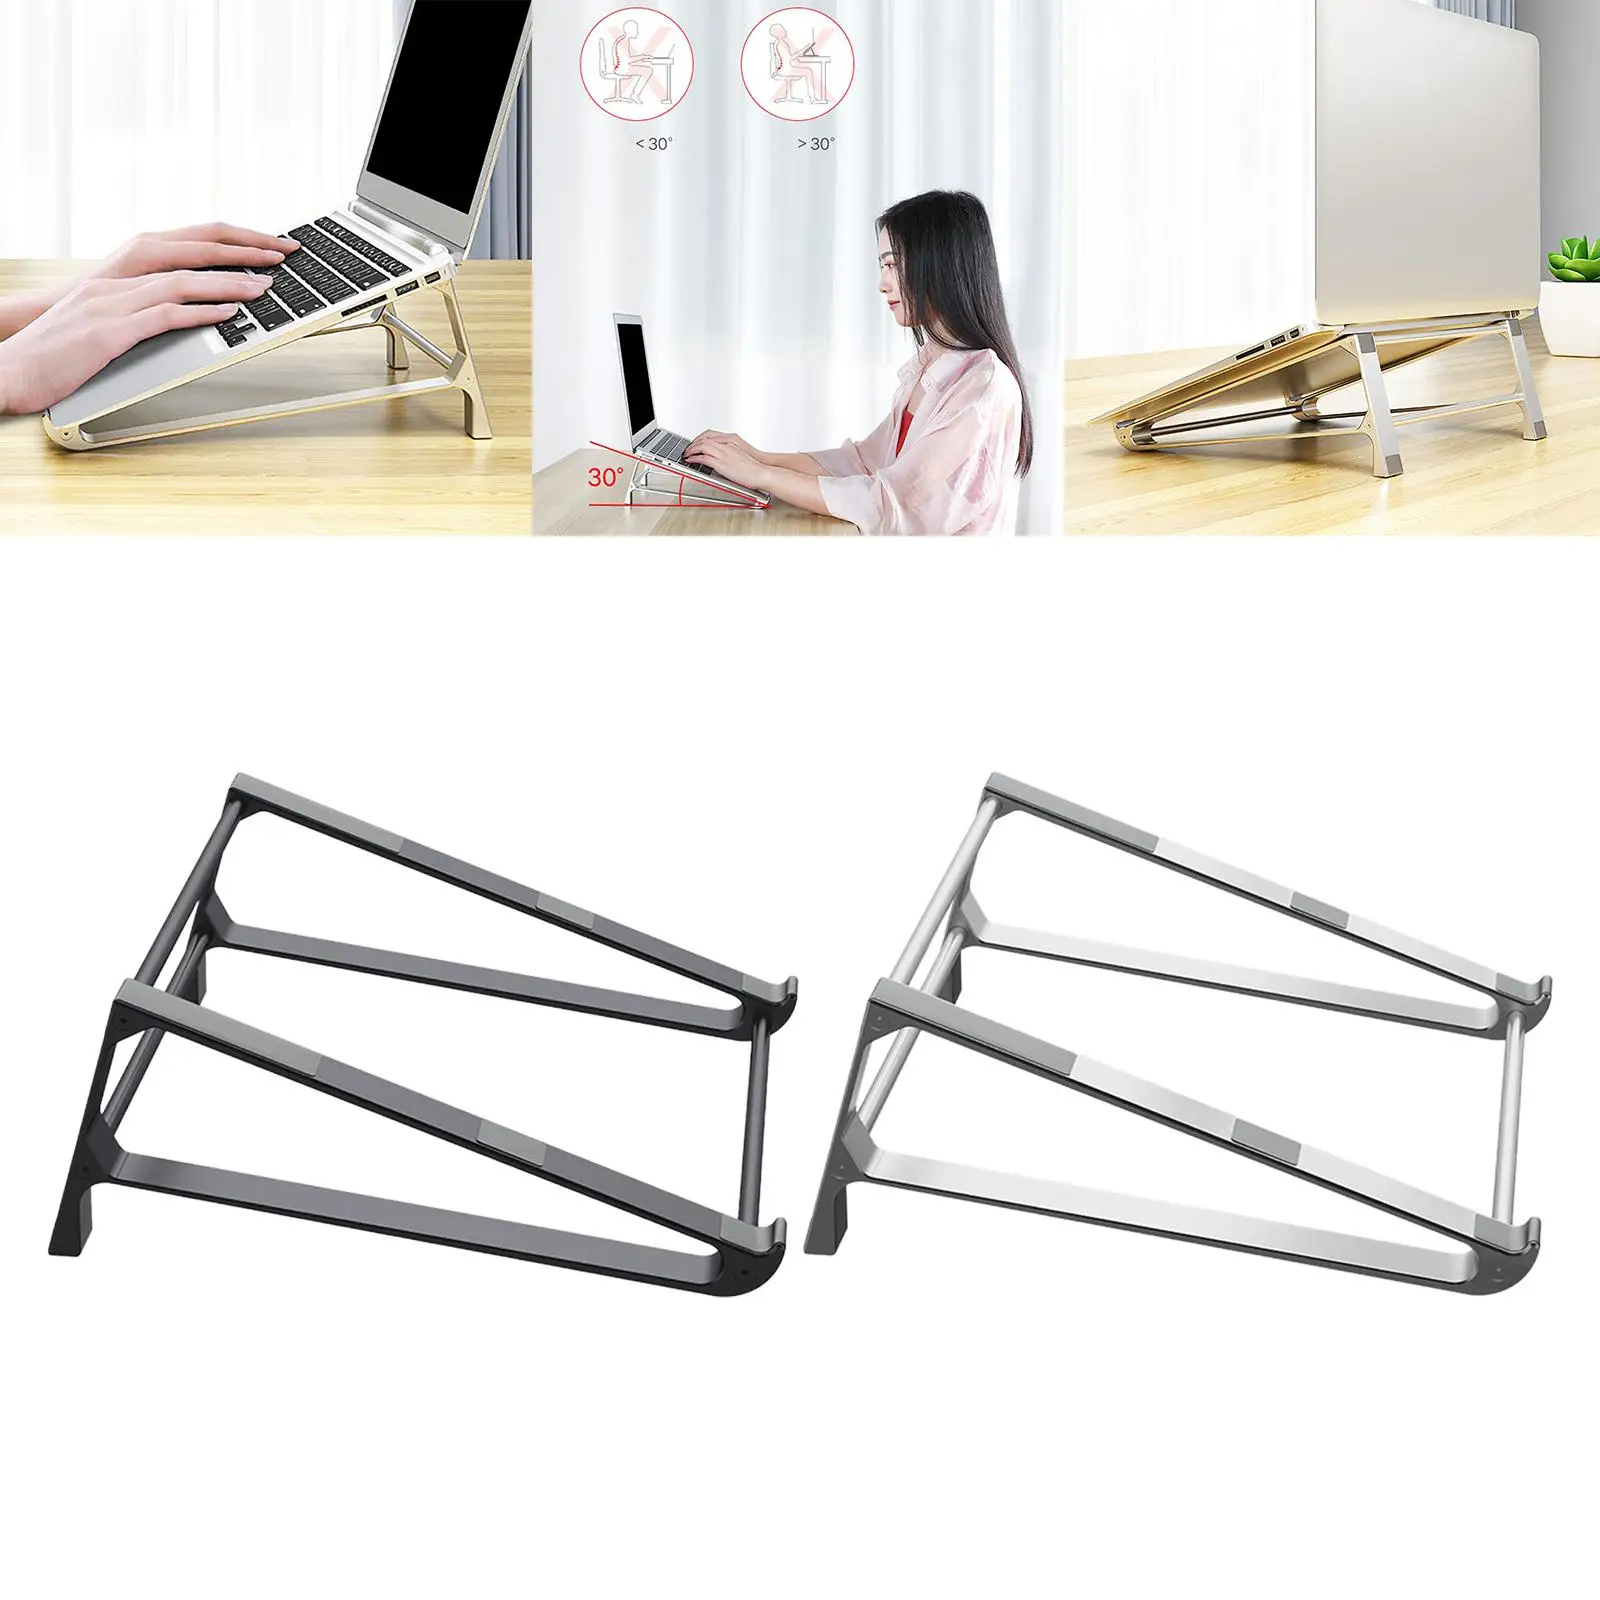 Aluminum Laptop Stand Non Slip 30 Angle Laptop Vertical Storage Stand Typing Videos Compatible with Most 11-15.6 Laptops